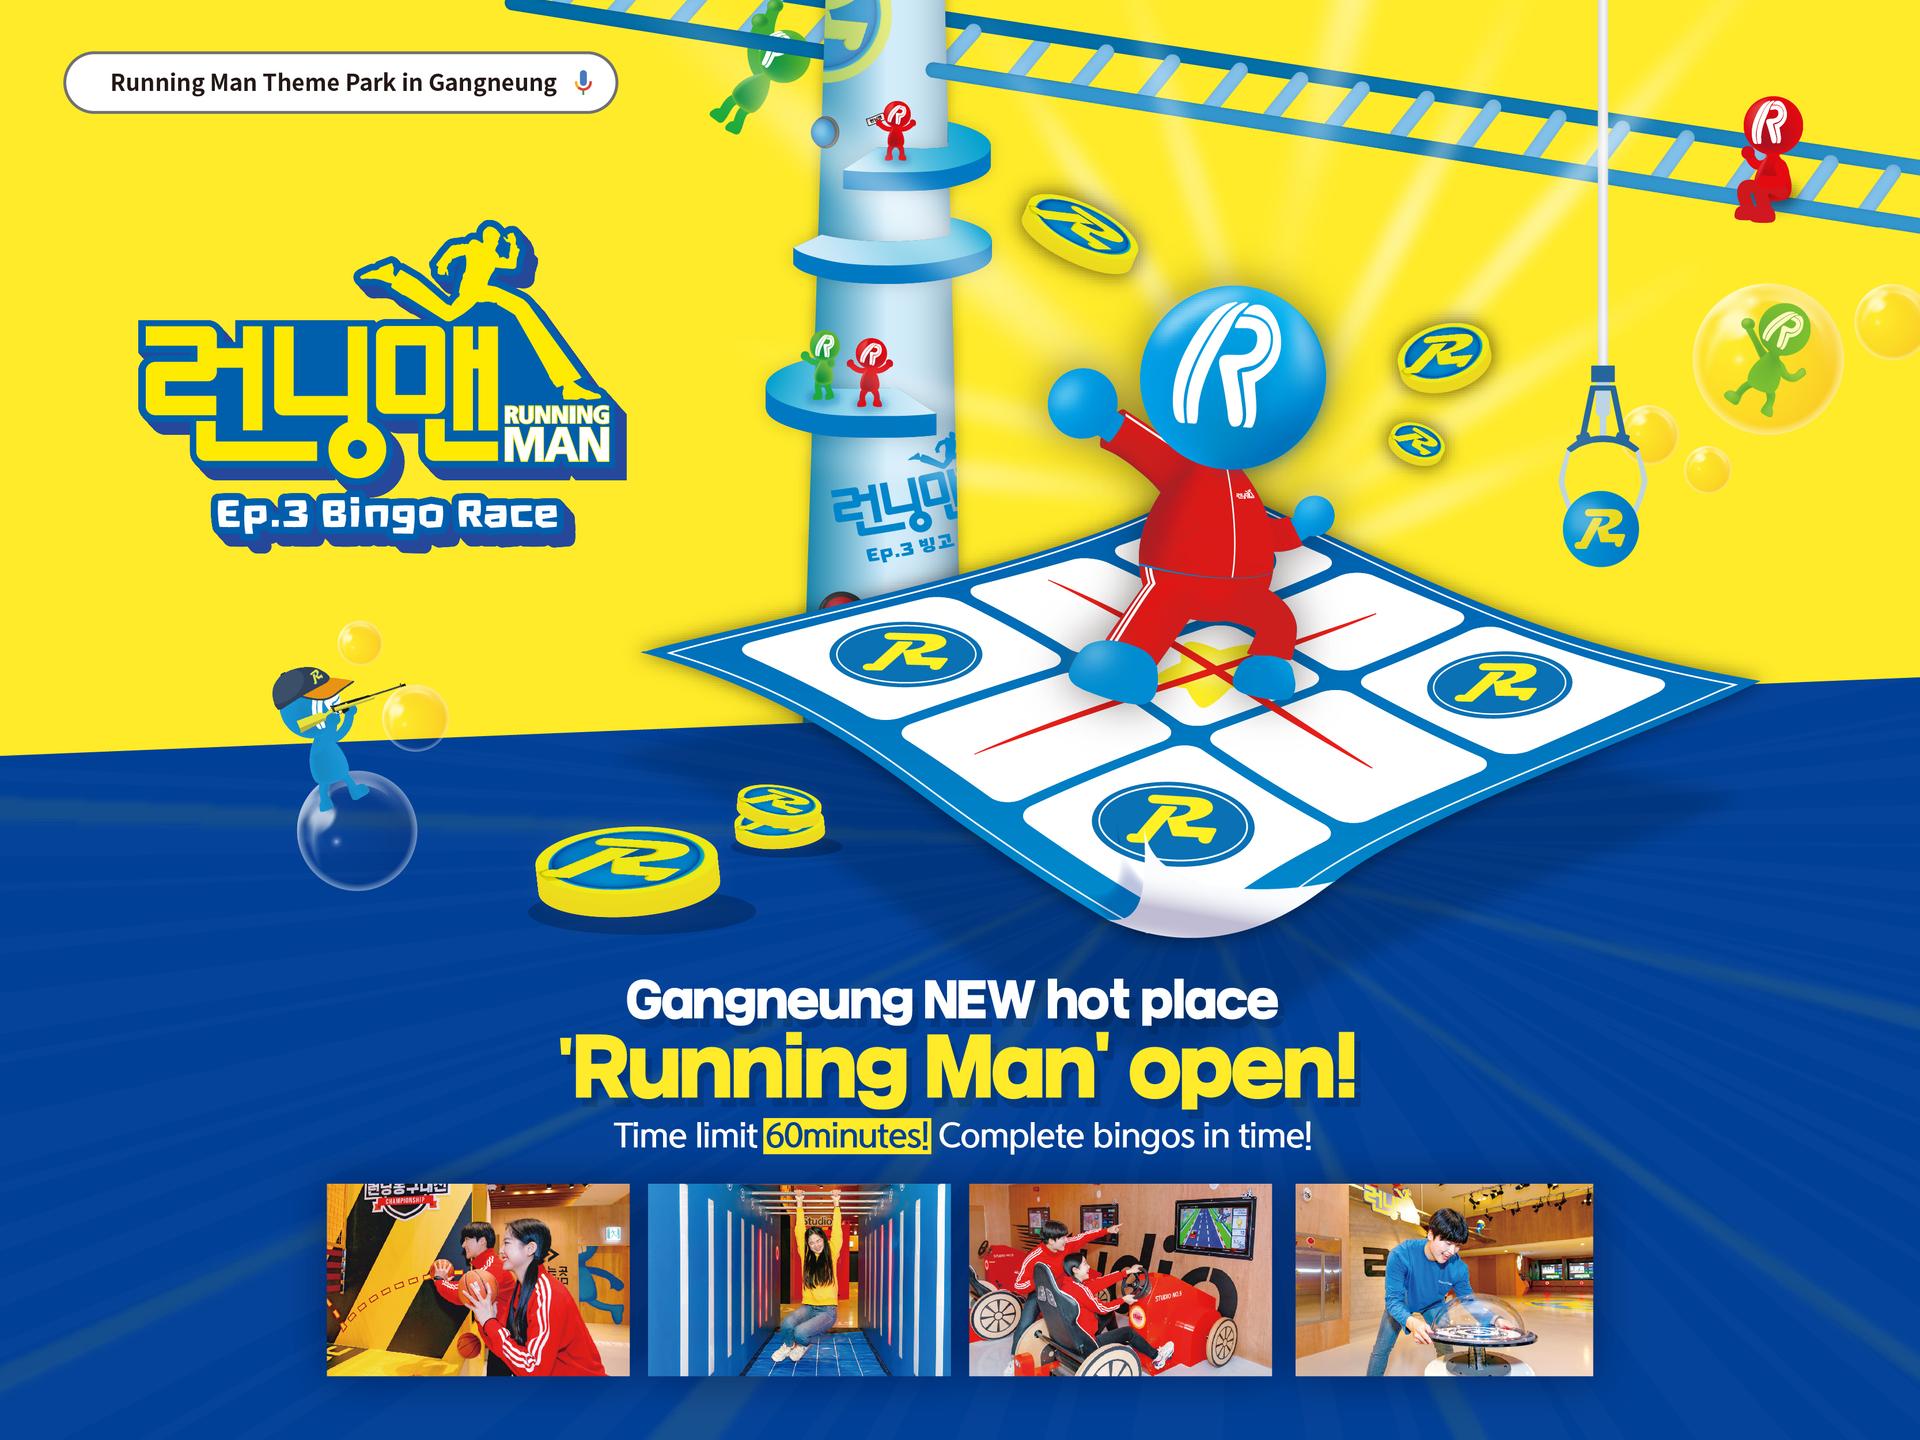 Running Man Experience In Gangneung